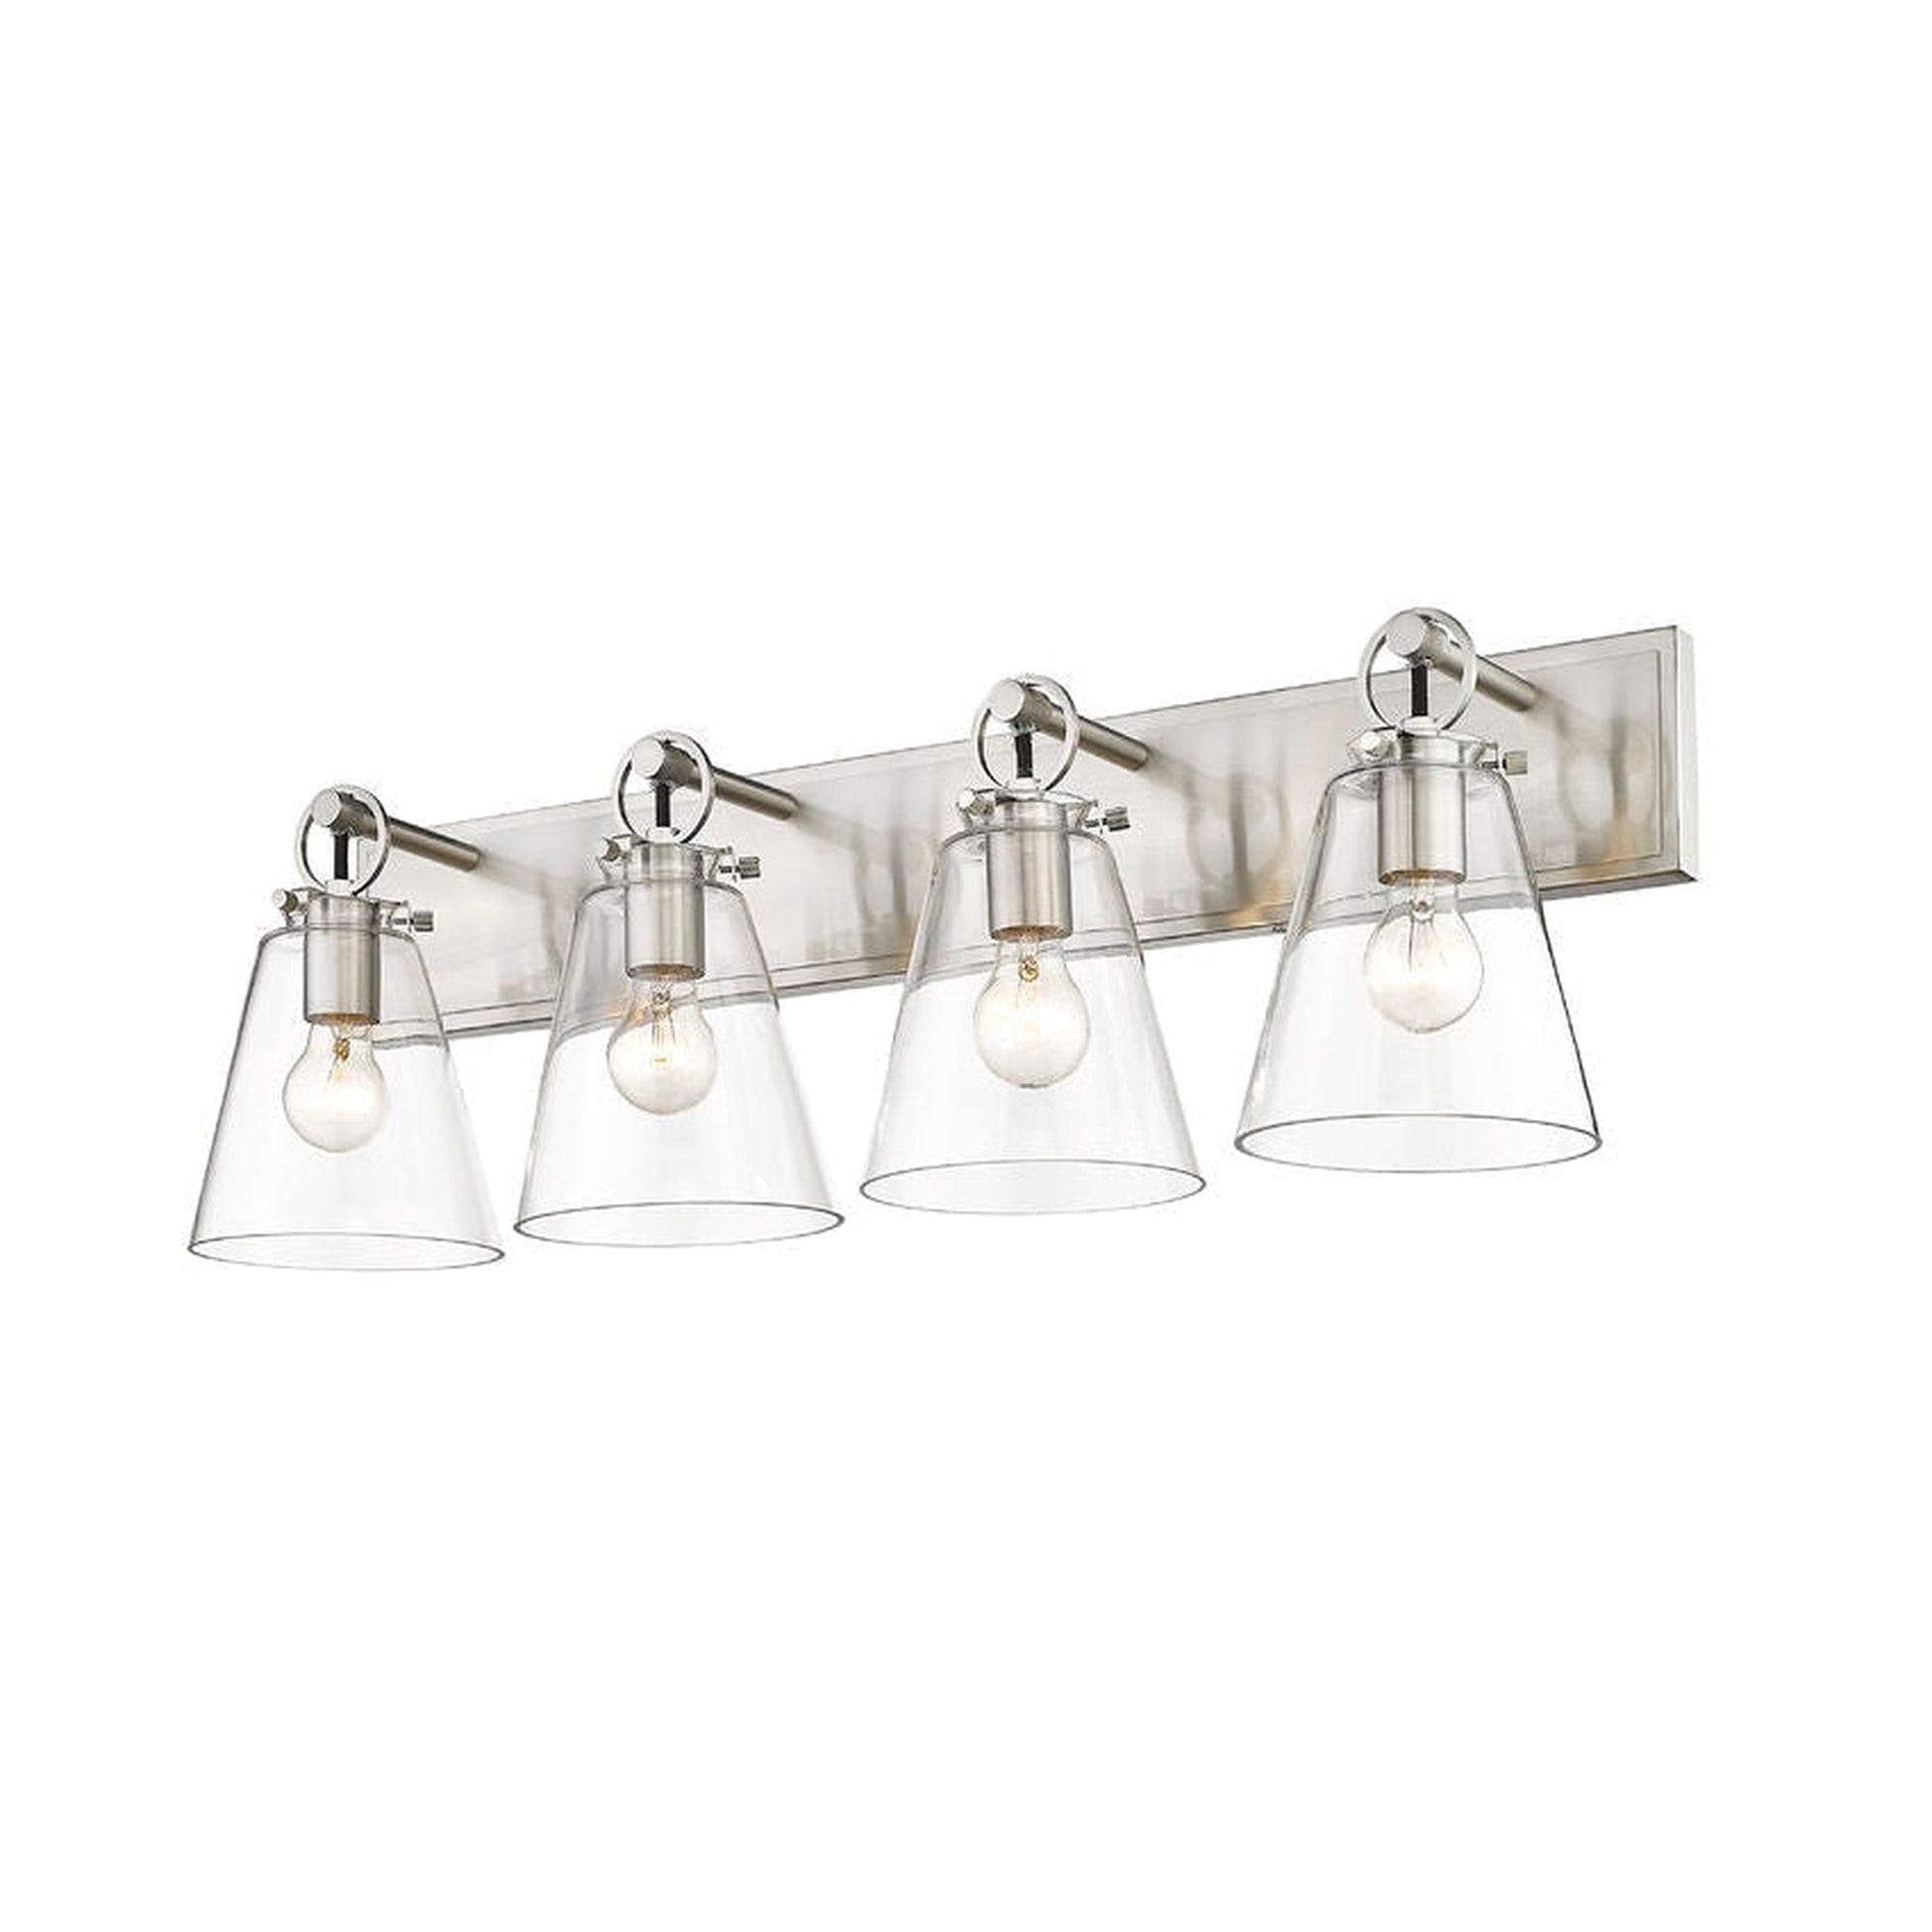 Z-Lite Harper 31" 4-Light Brushed Nickel Vanity Light With Clear Glass Shade